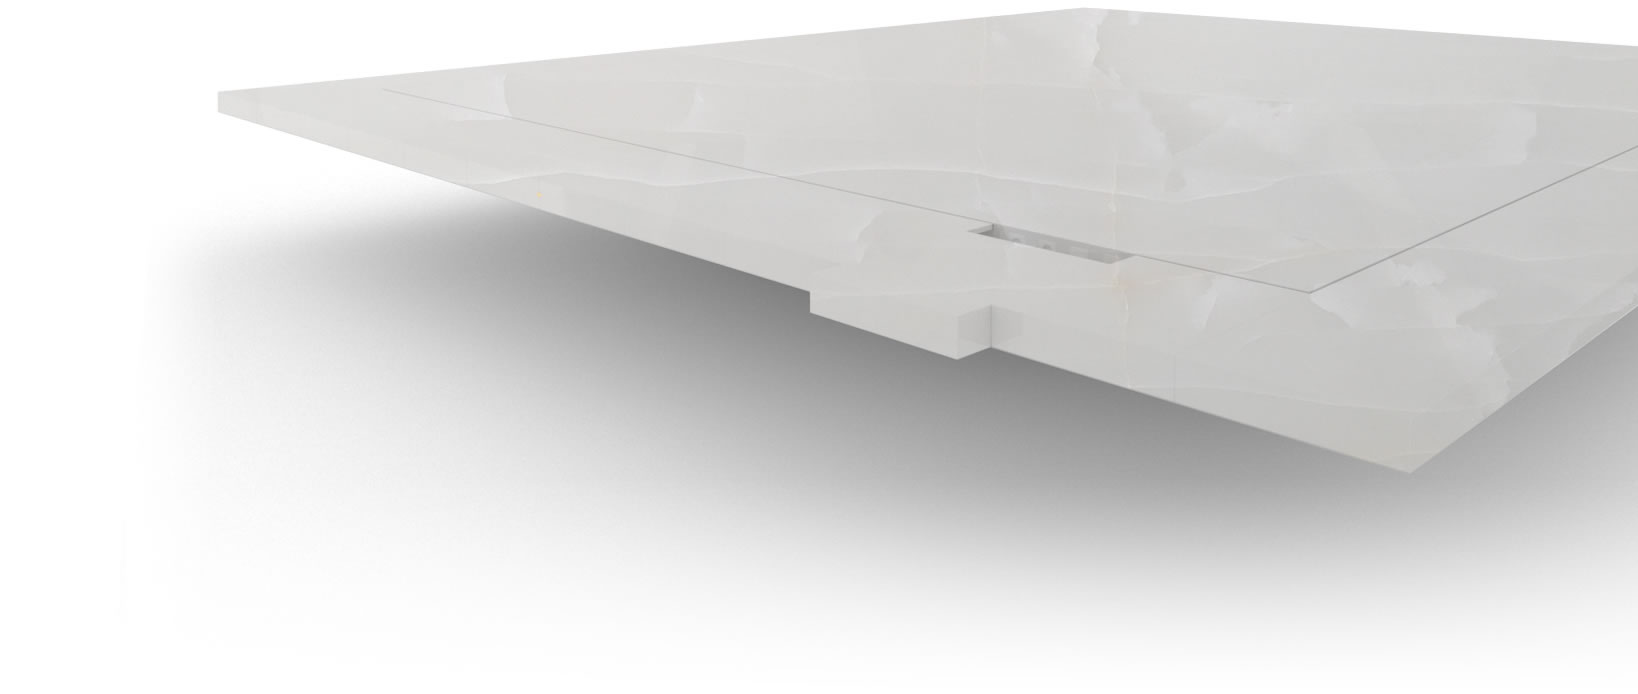 FELIX SCHWAKE BOARDROOM TABLE IV large structure onyx marble white modern boardroom table structure